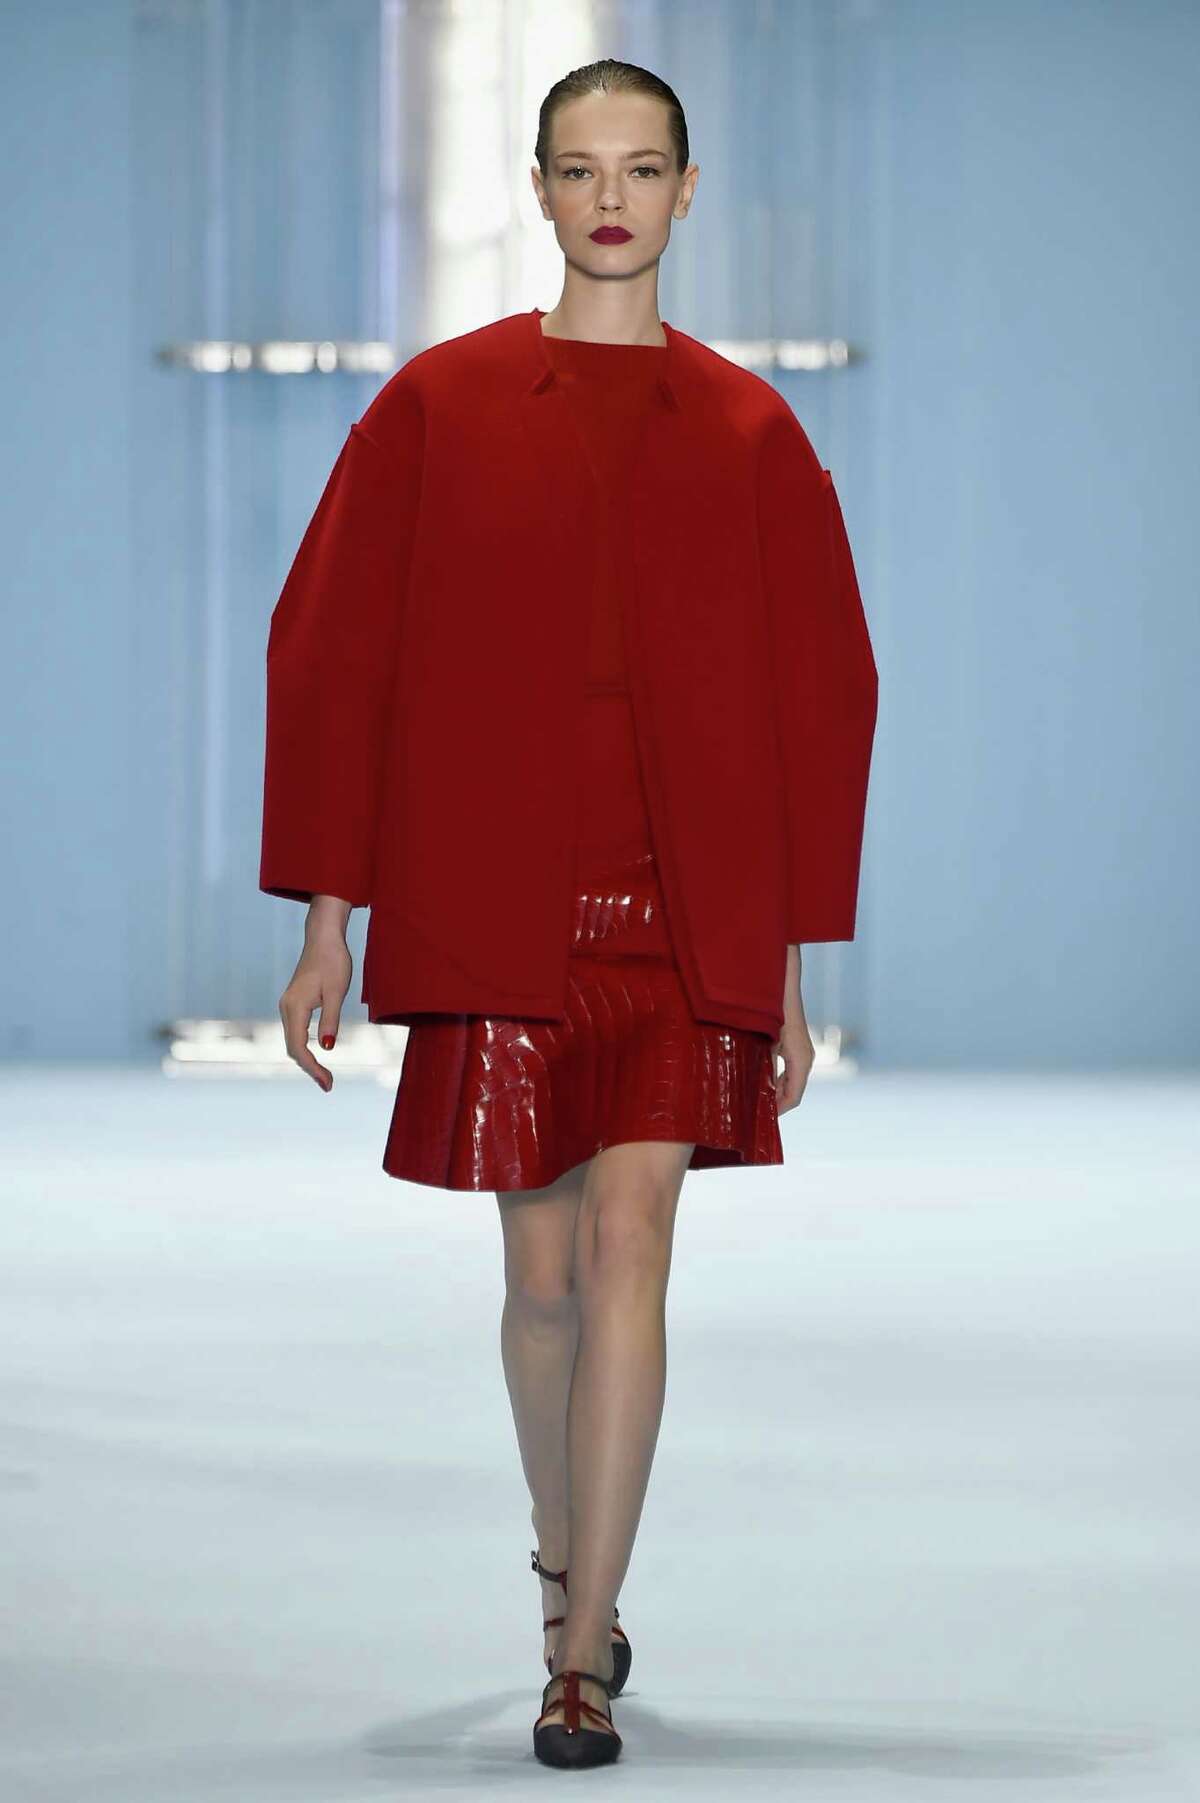 Carolina Herrera incorporated vibrant red in her fall 2015 collection shown during Mercedes-Benz Fashion Week. Her silhouettes included coats that were less boxy but still ample enough to layer with.